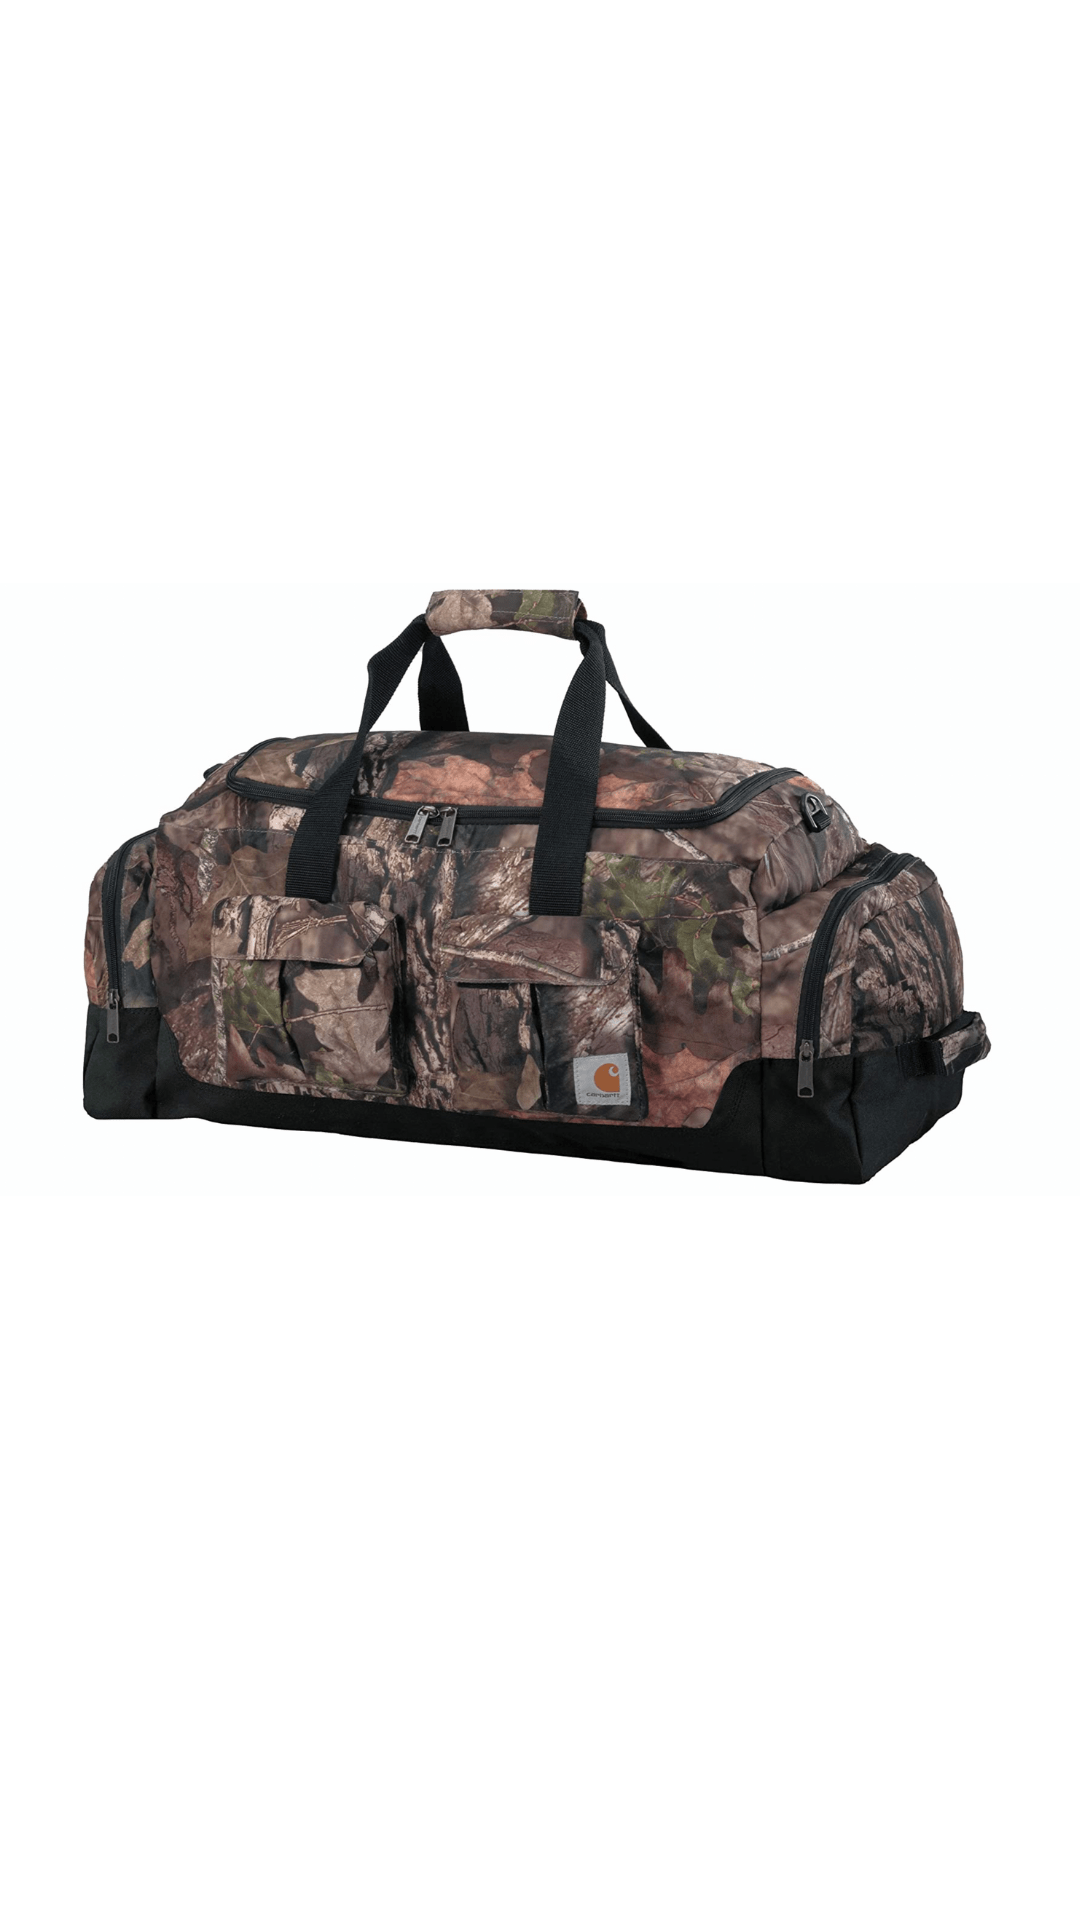 Camouflage print duffle bag from Carhartt